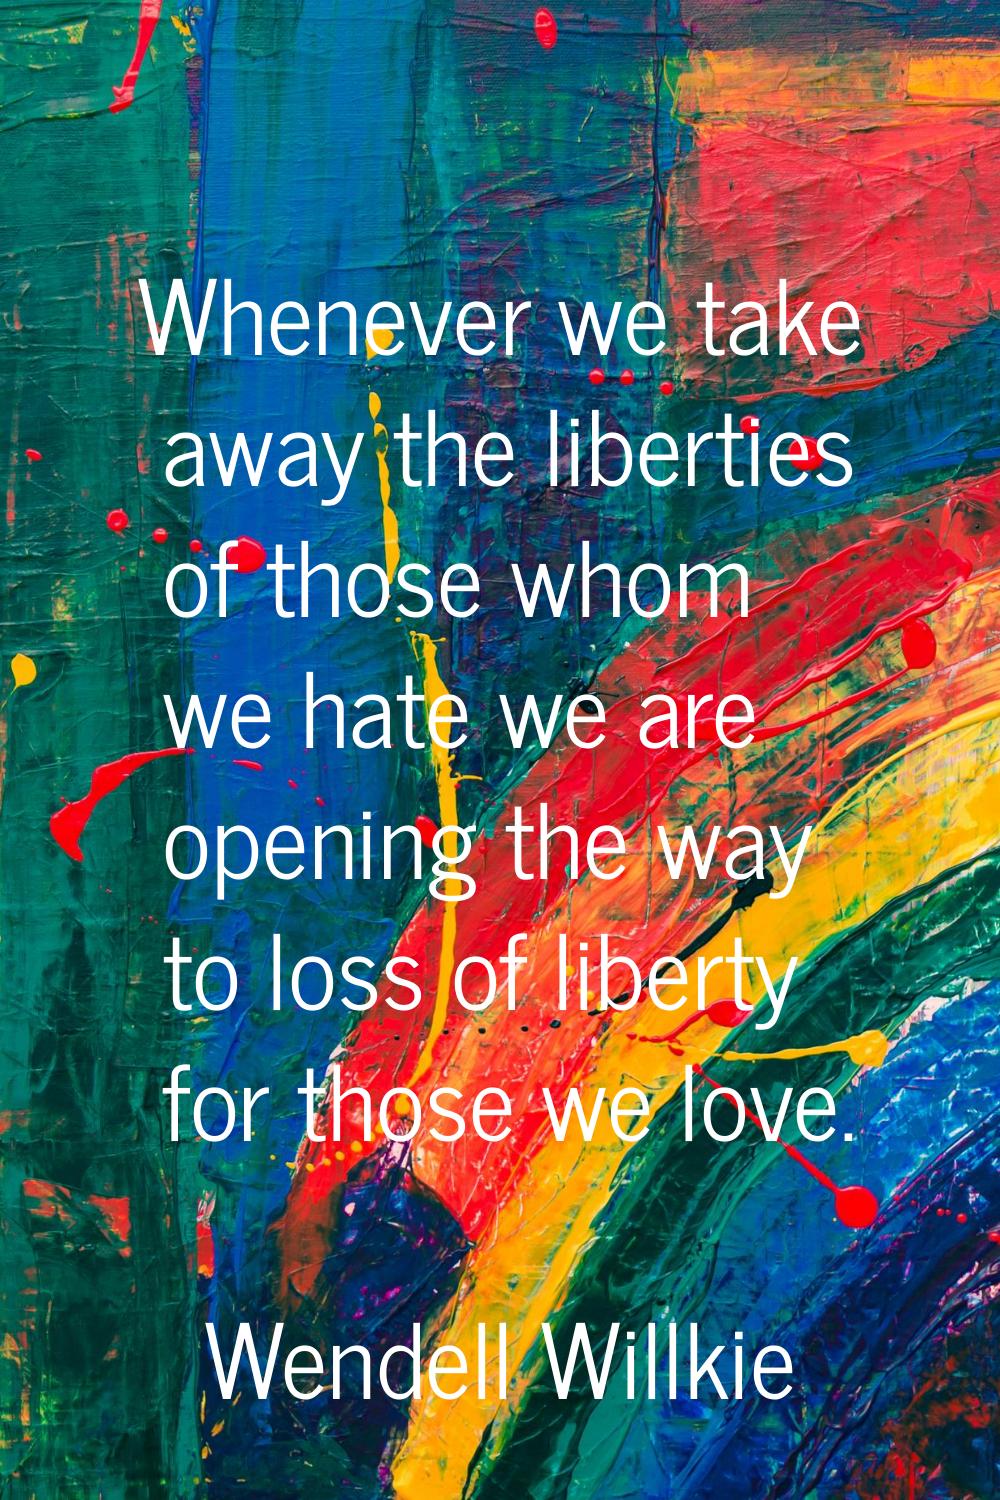 Whenever we take away the liberties of those whom we hate we are opening the way to loss of liberty